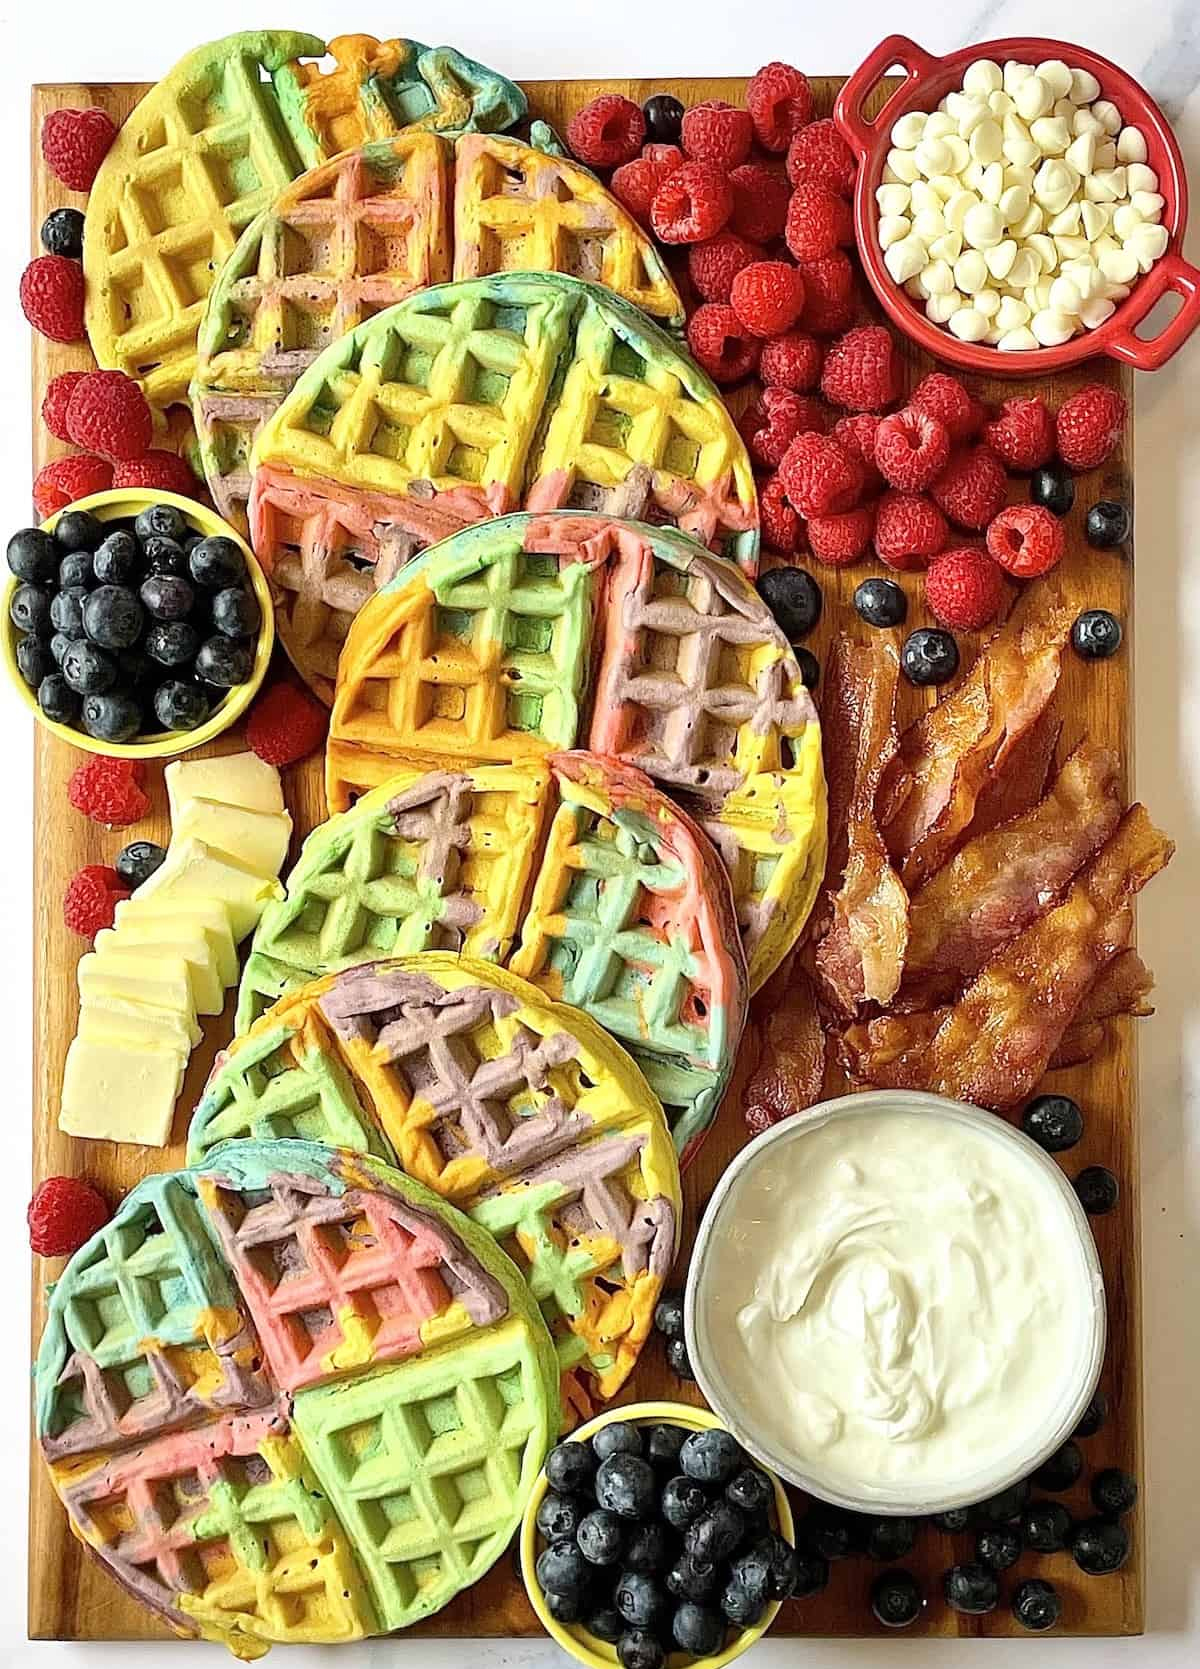 tasty oven has created rainbow waffles with white chocolate chips, fruits, and more. 